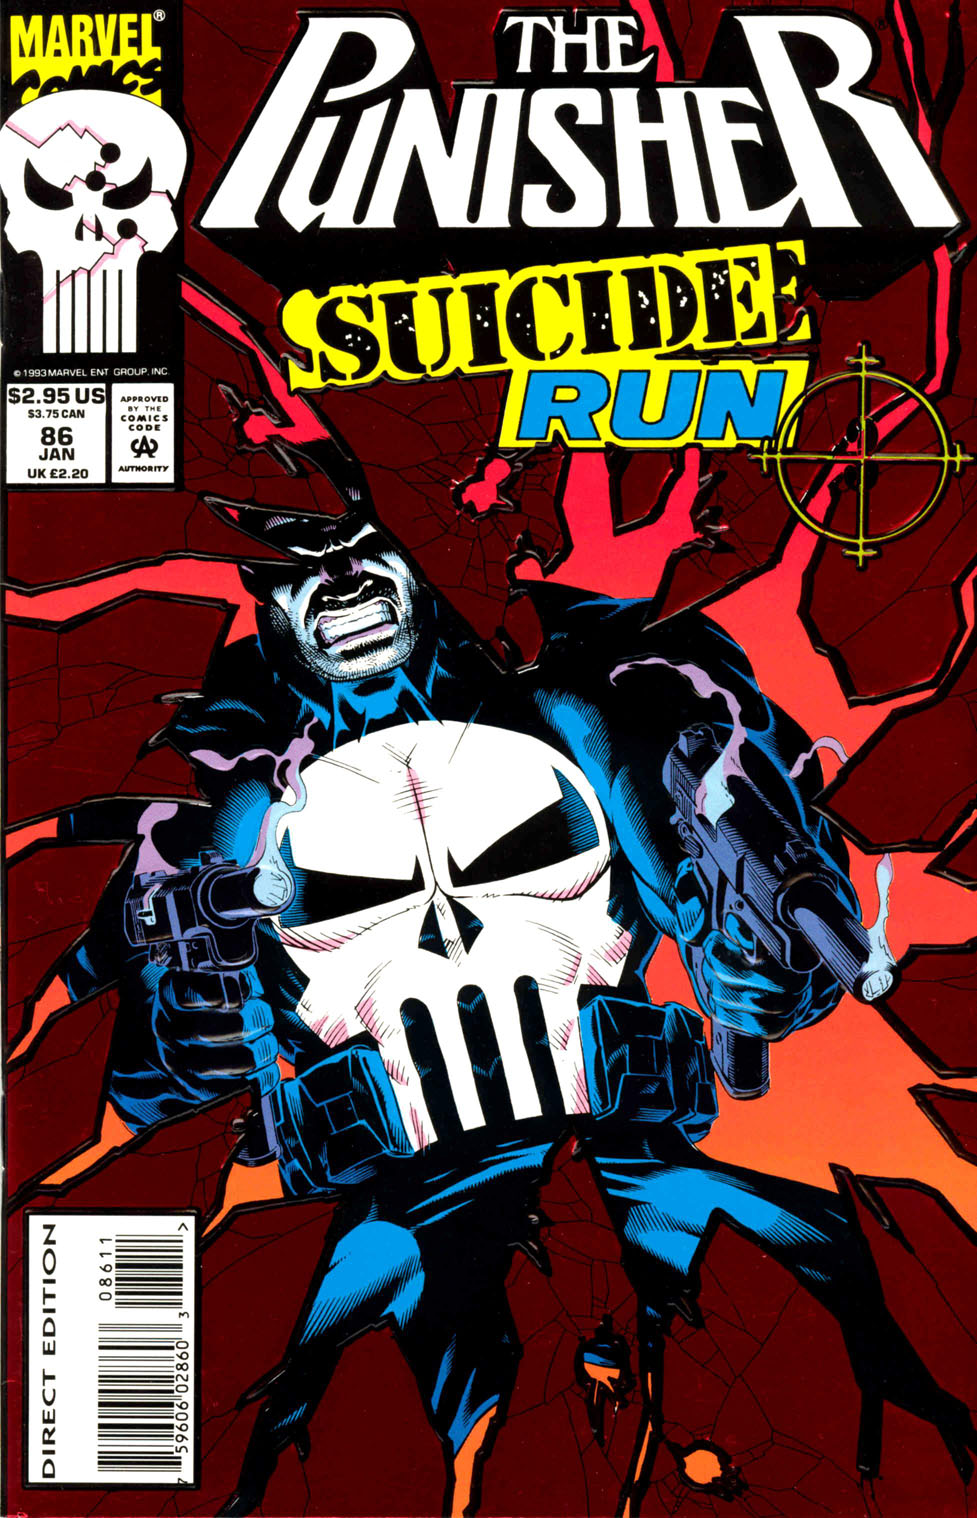 The Punisher (1987) issue 86 - Suicide Run #03 - Page 1